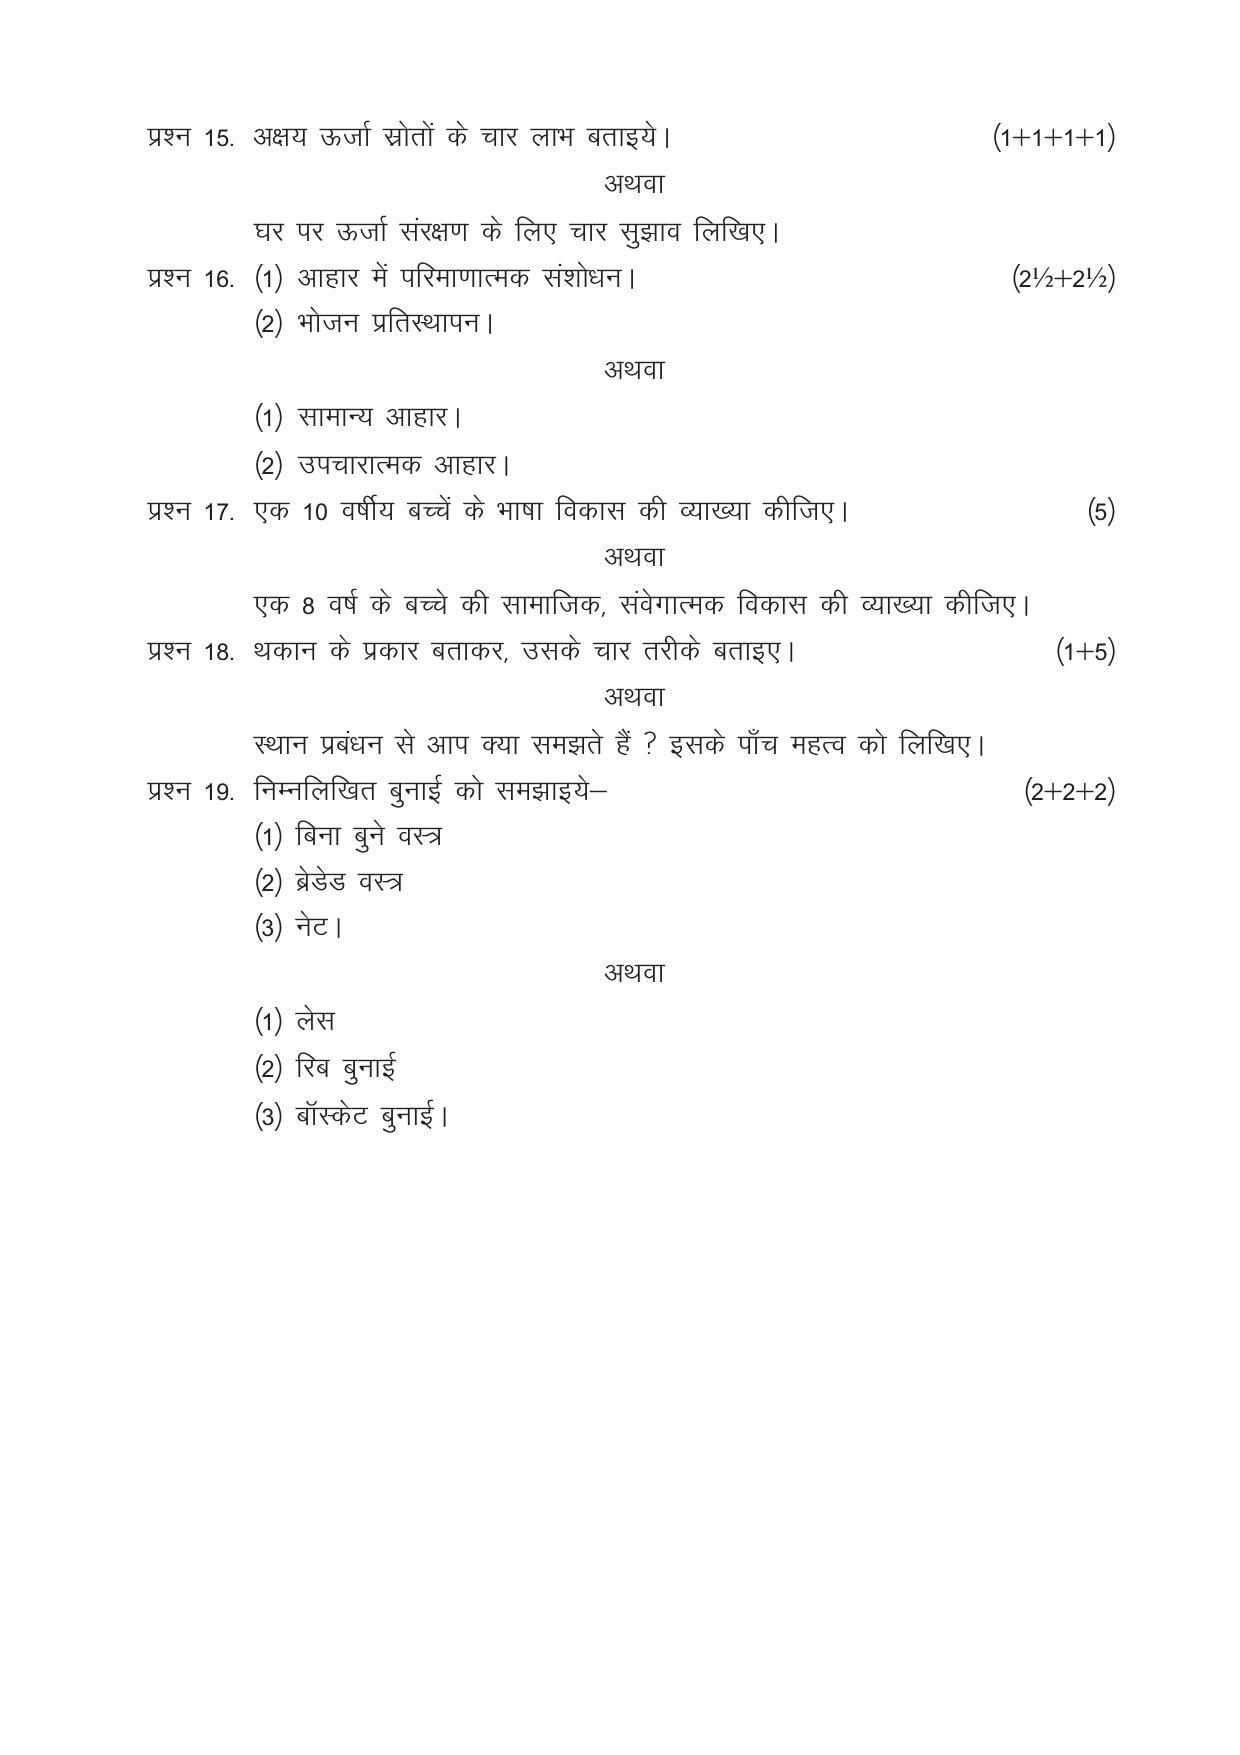 CGSOS Class 12 Model Question Paper - Home Science - II - Page 3